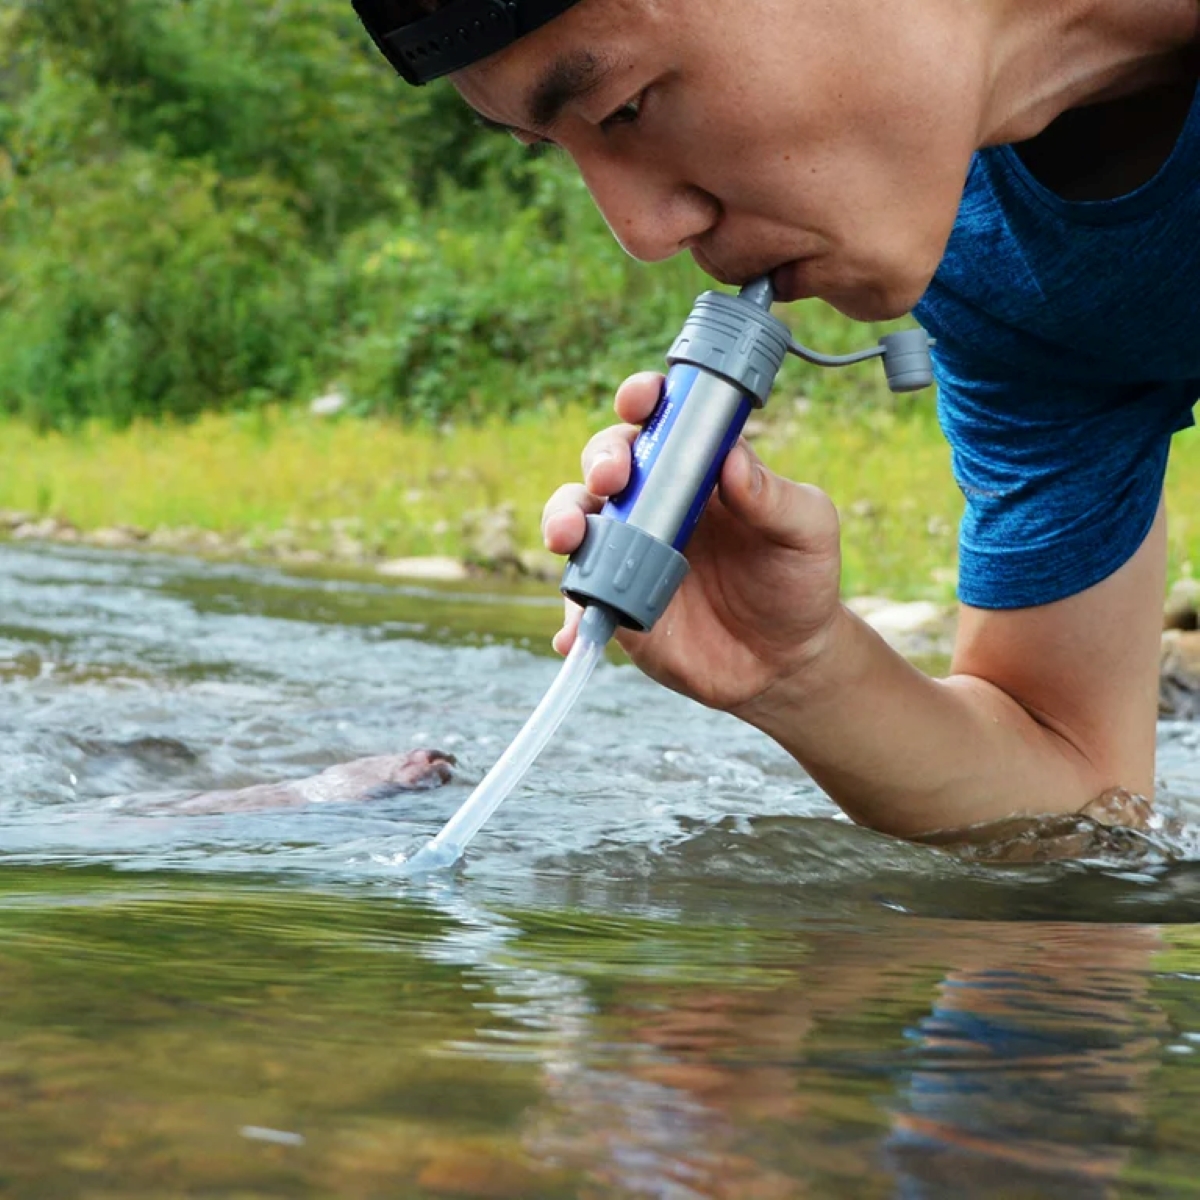 Man using water filter to drink from stream